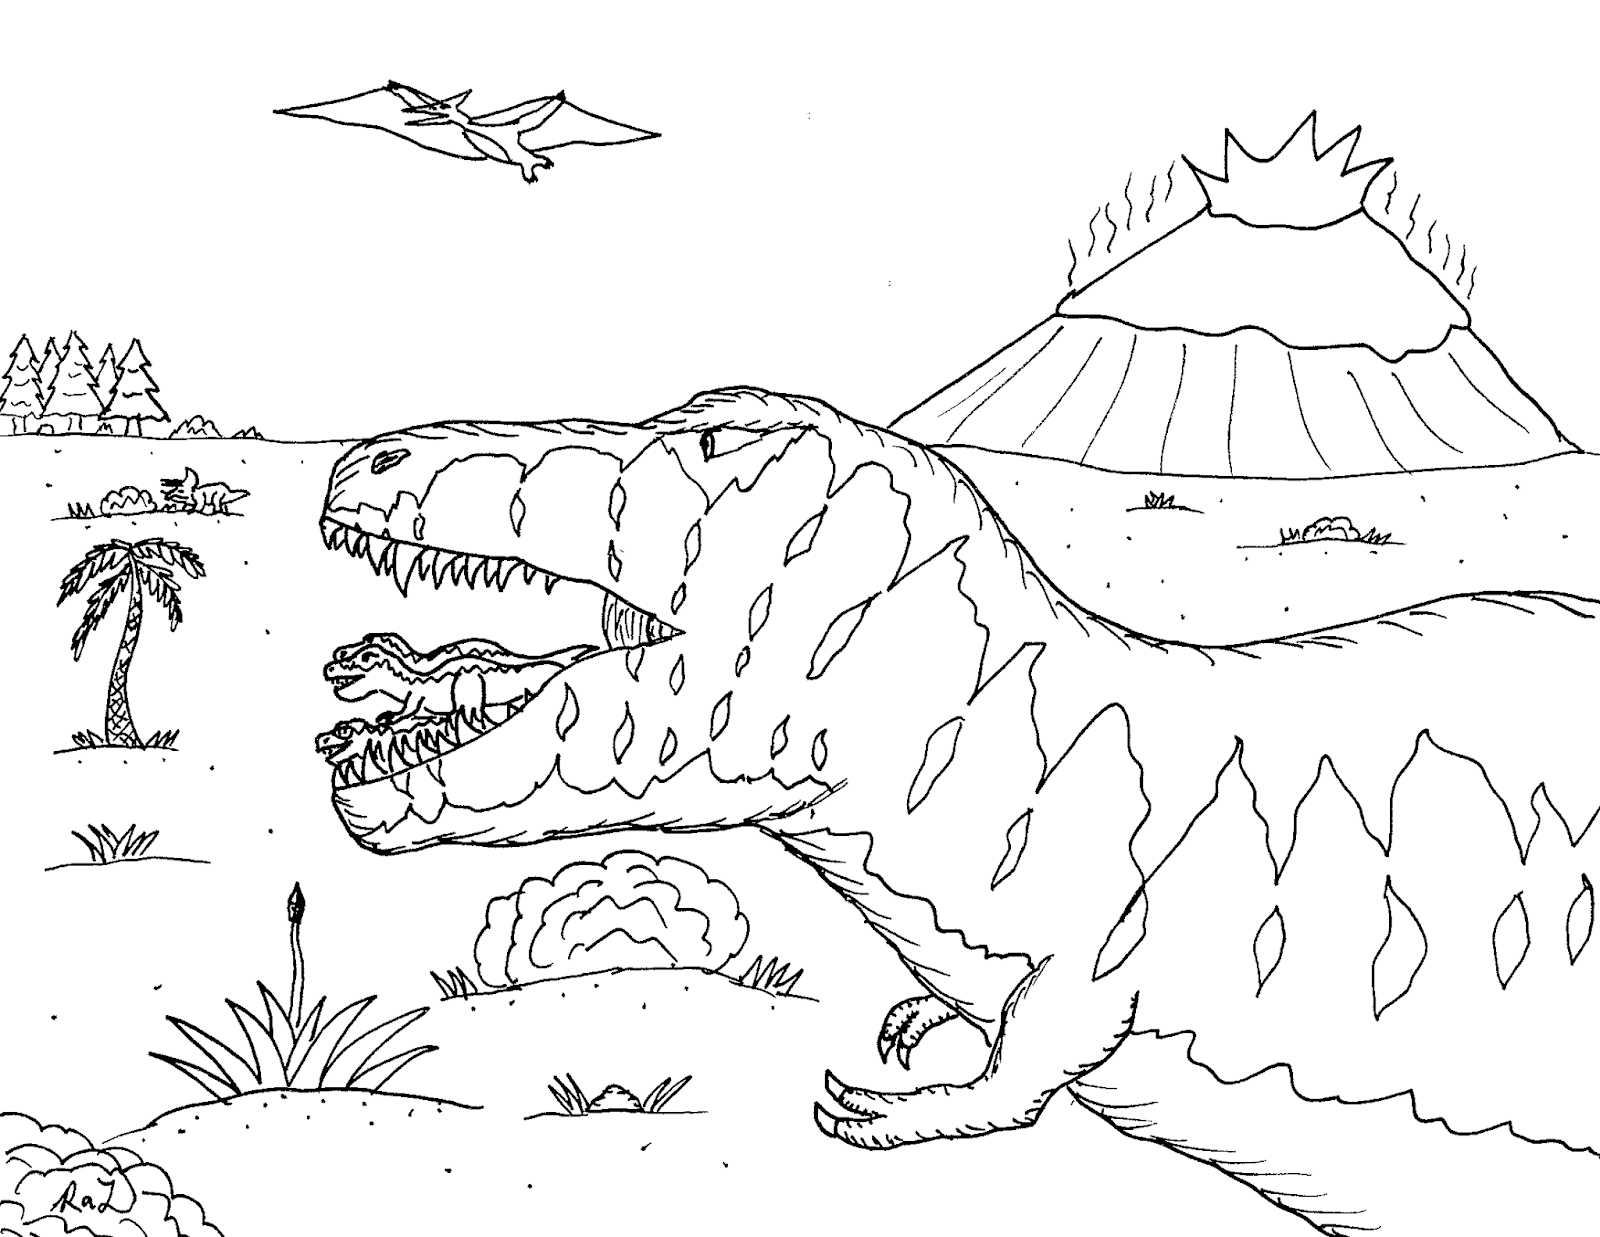 Robin's Great Coloring Pages: Tyrannosaurus rex Mothers for Mother's Day